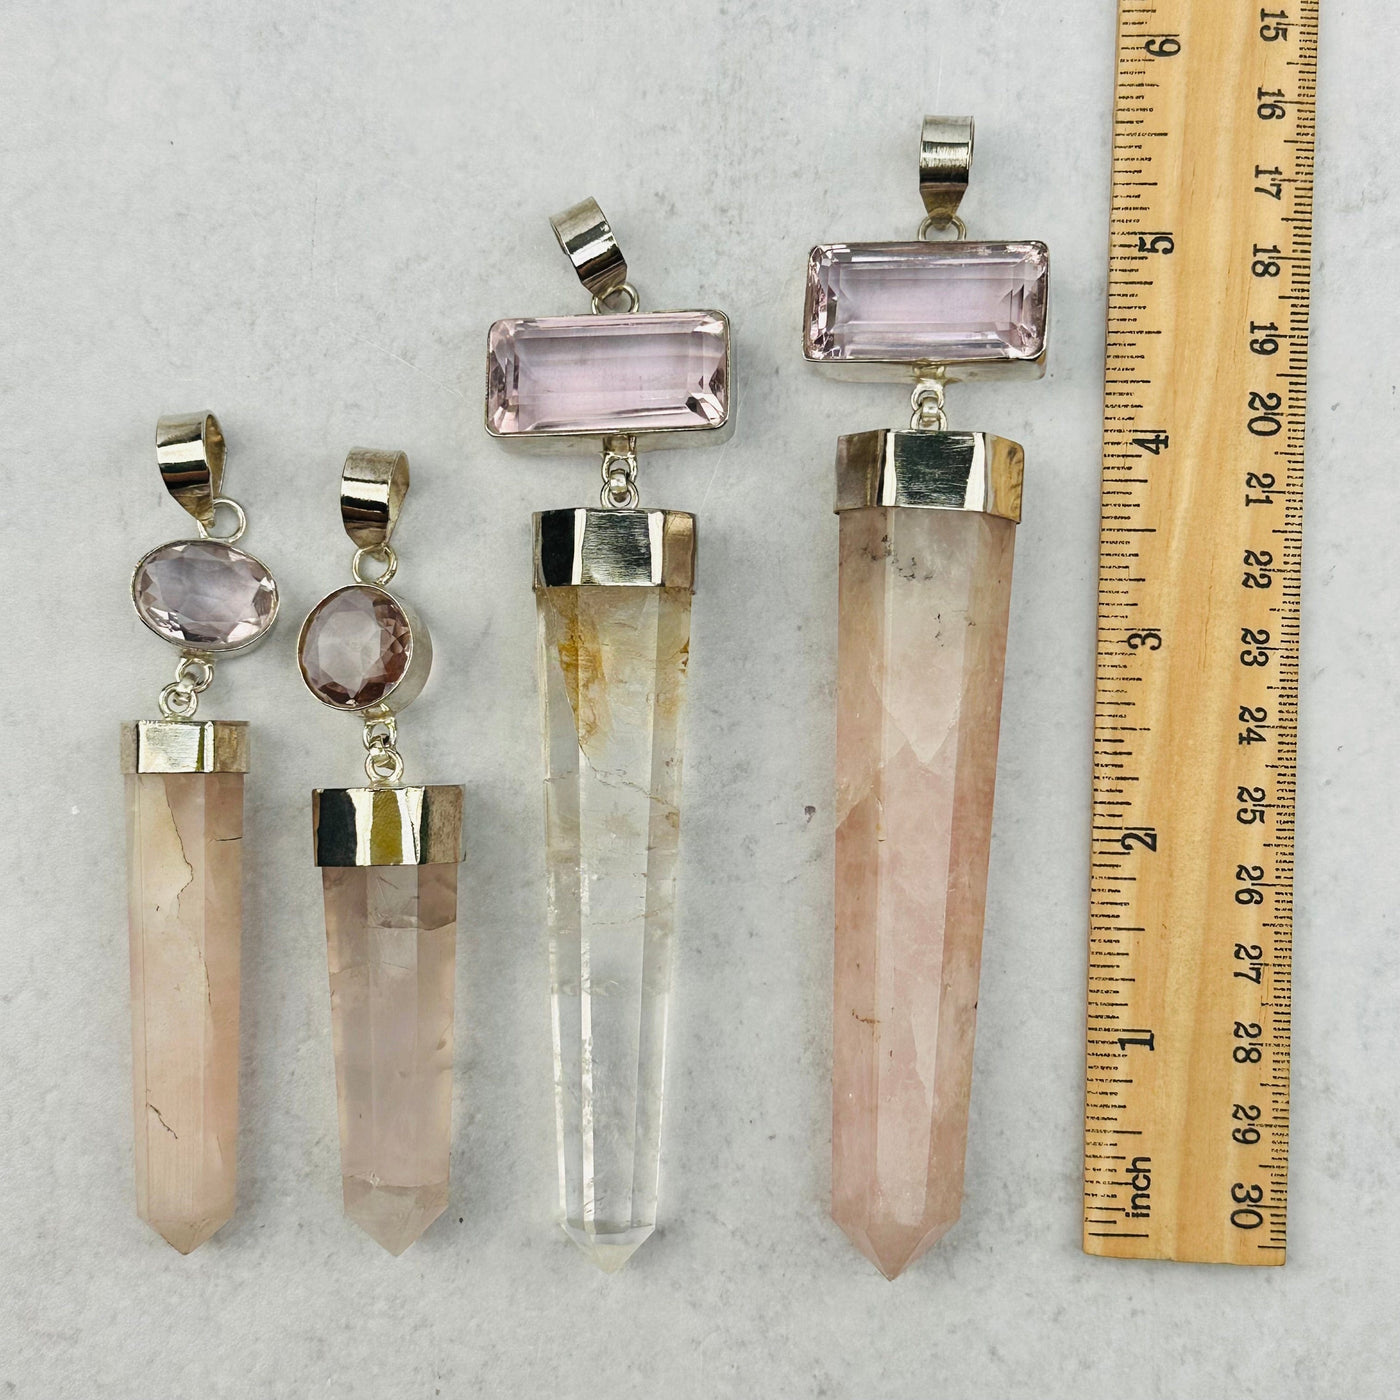 large pendants next to a ruler for size reference 